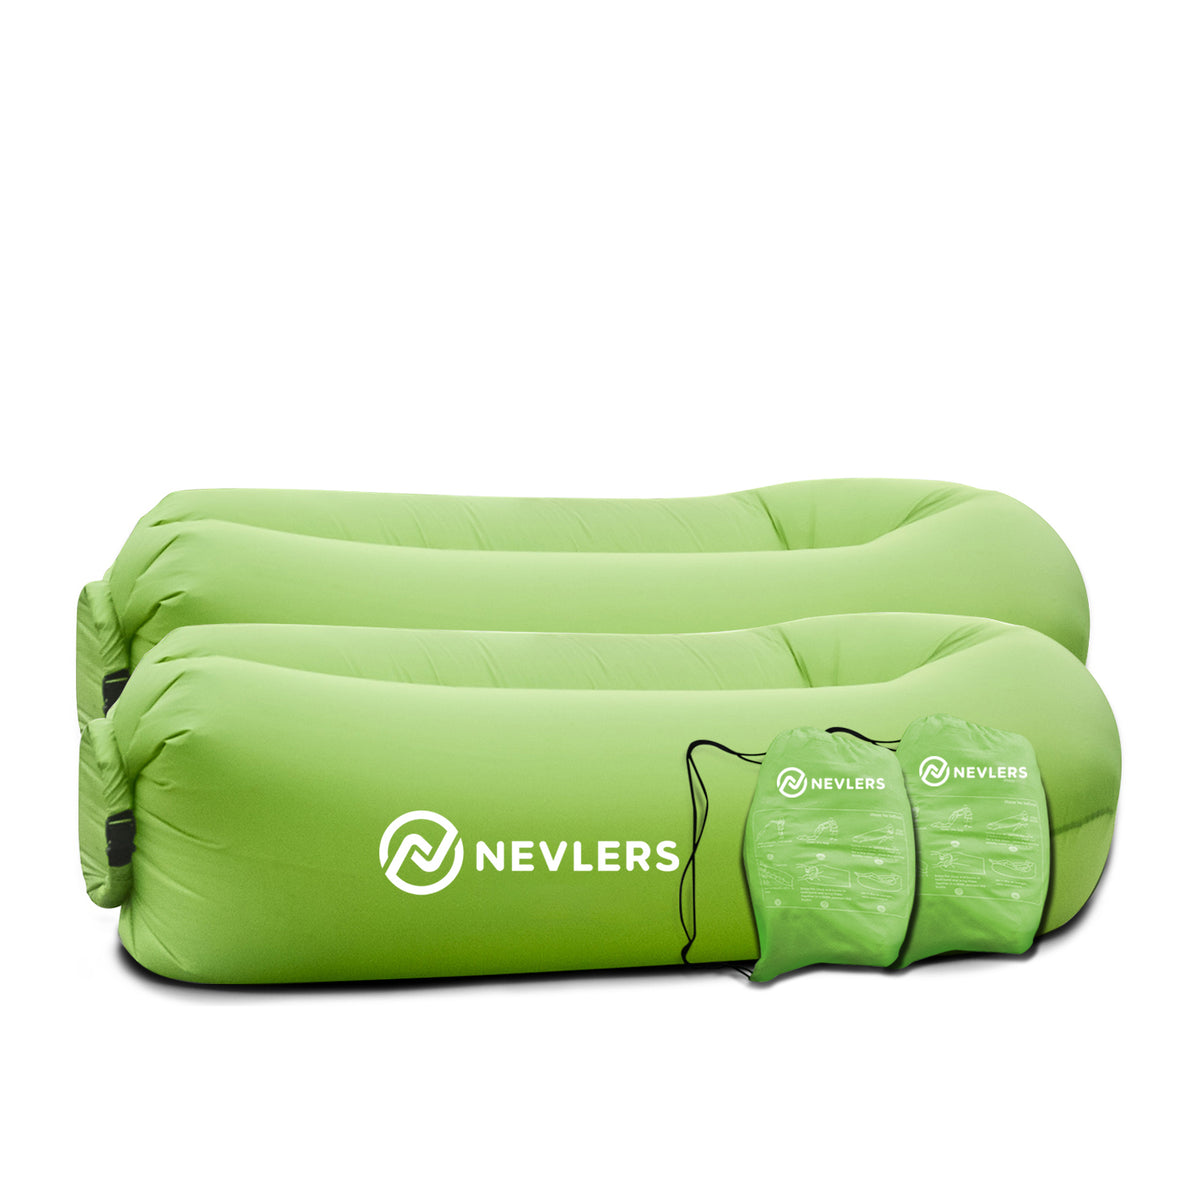 Inflatable Loungers - Green 2 Pack